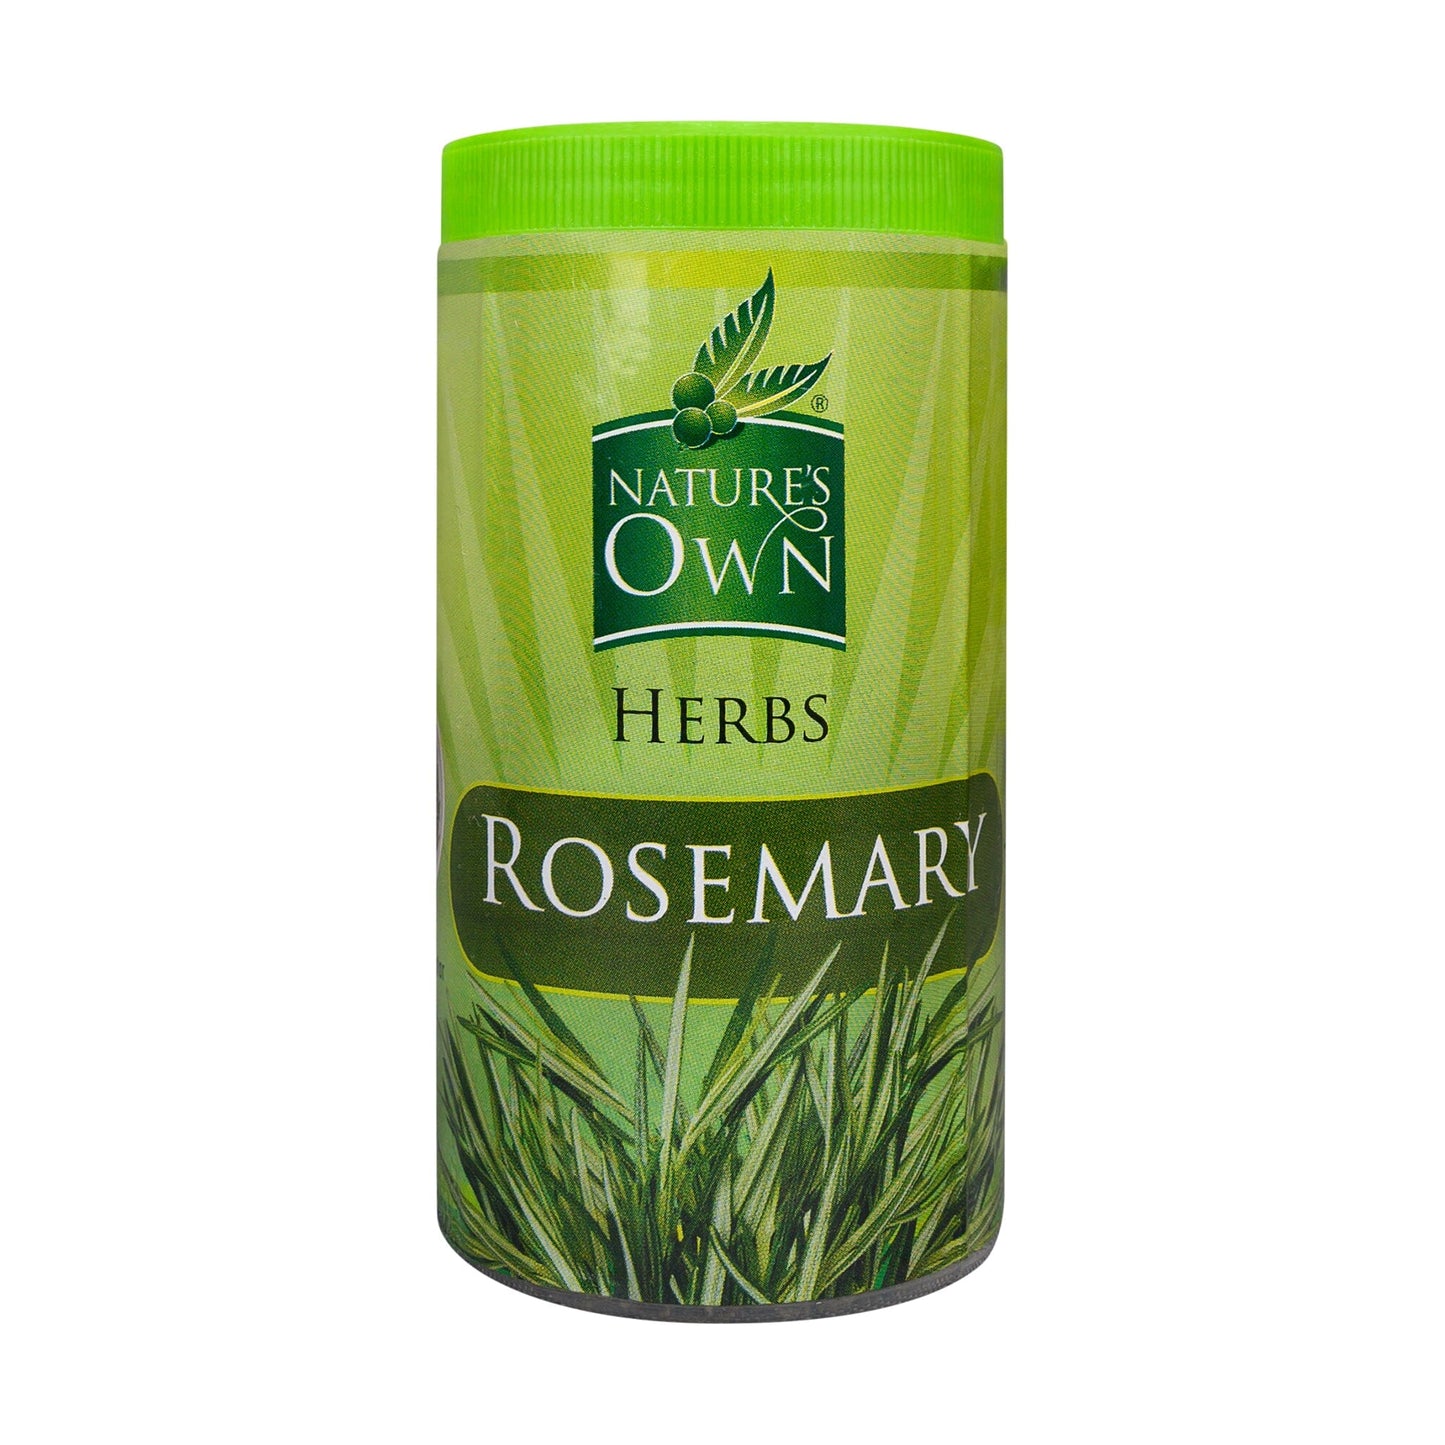 Nature's Own Herbs Rosemary